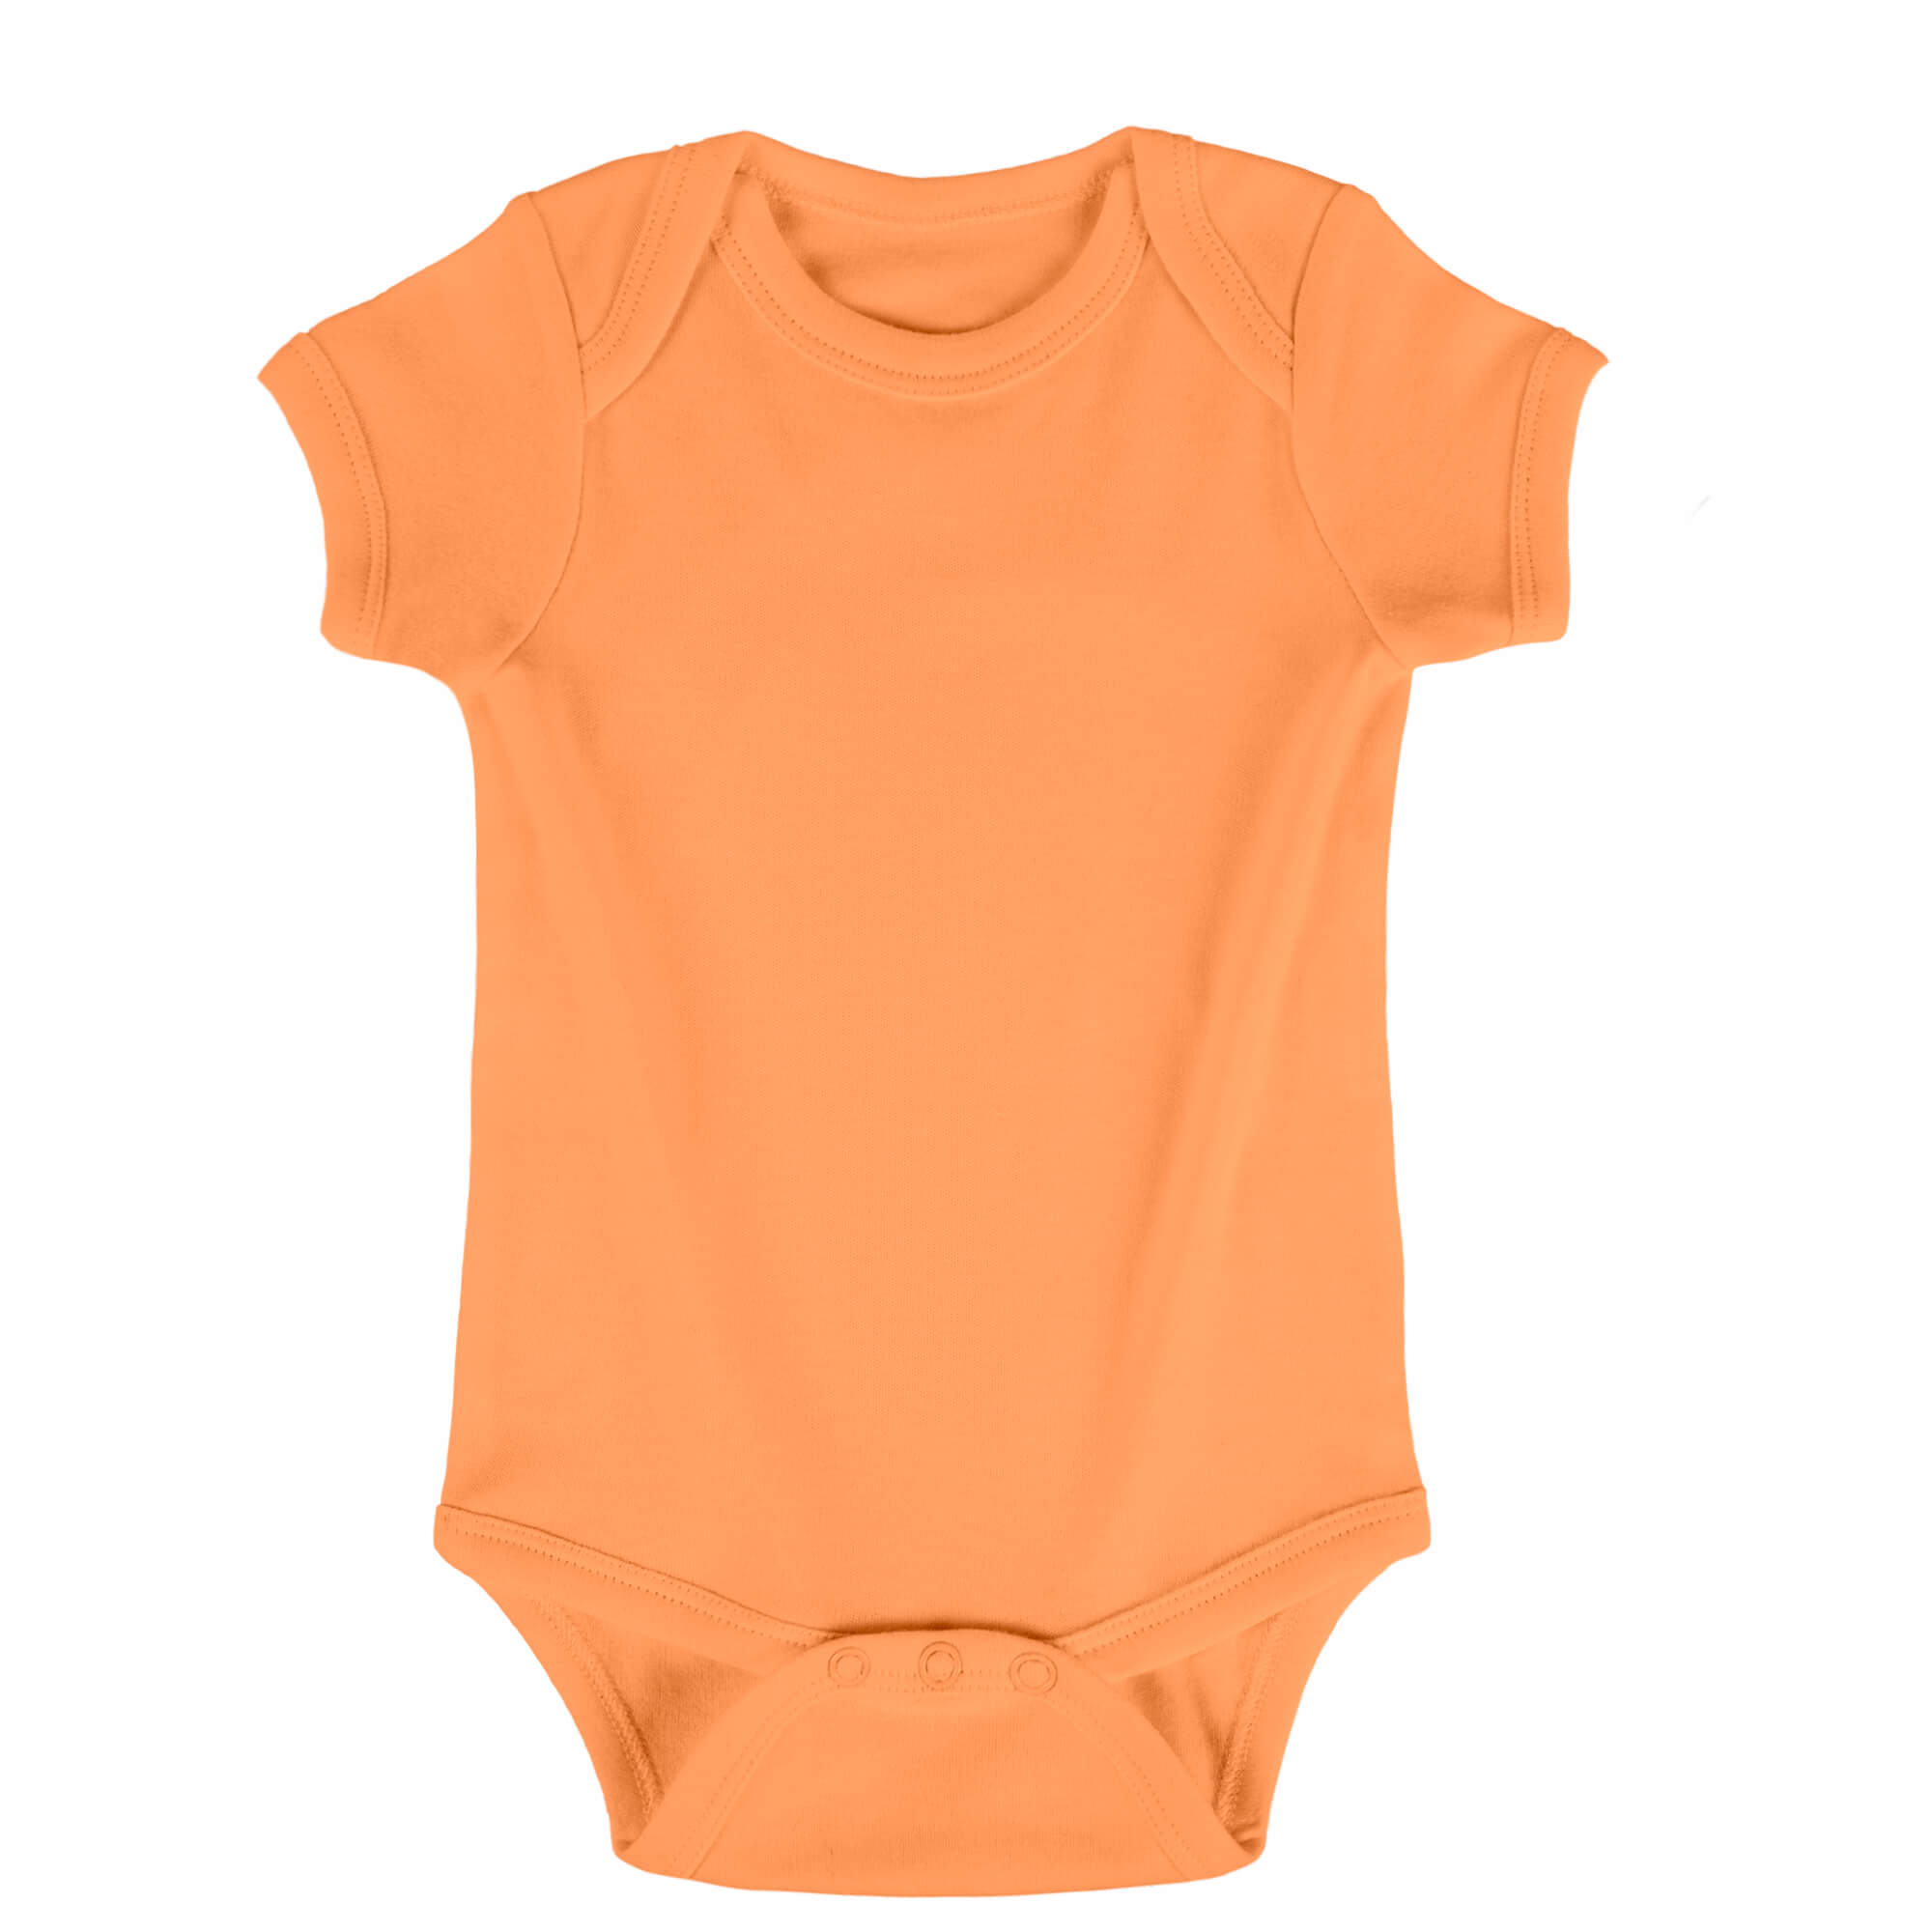 light orange color number #32, onesie color selection, and color display.